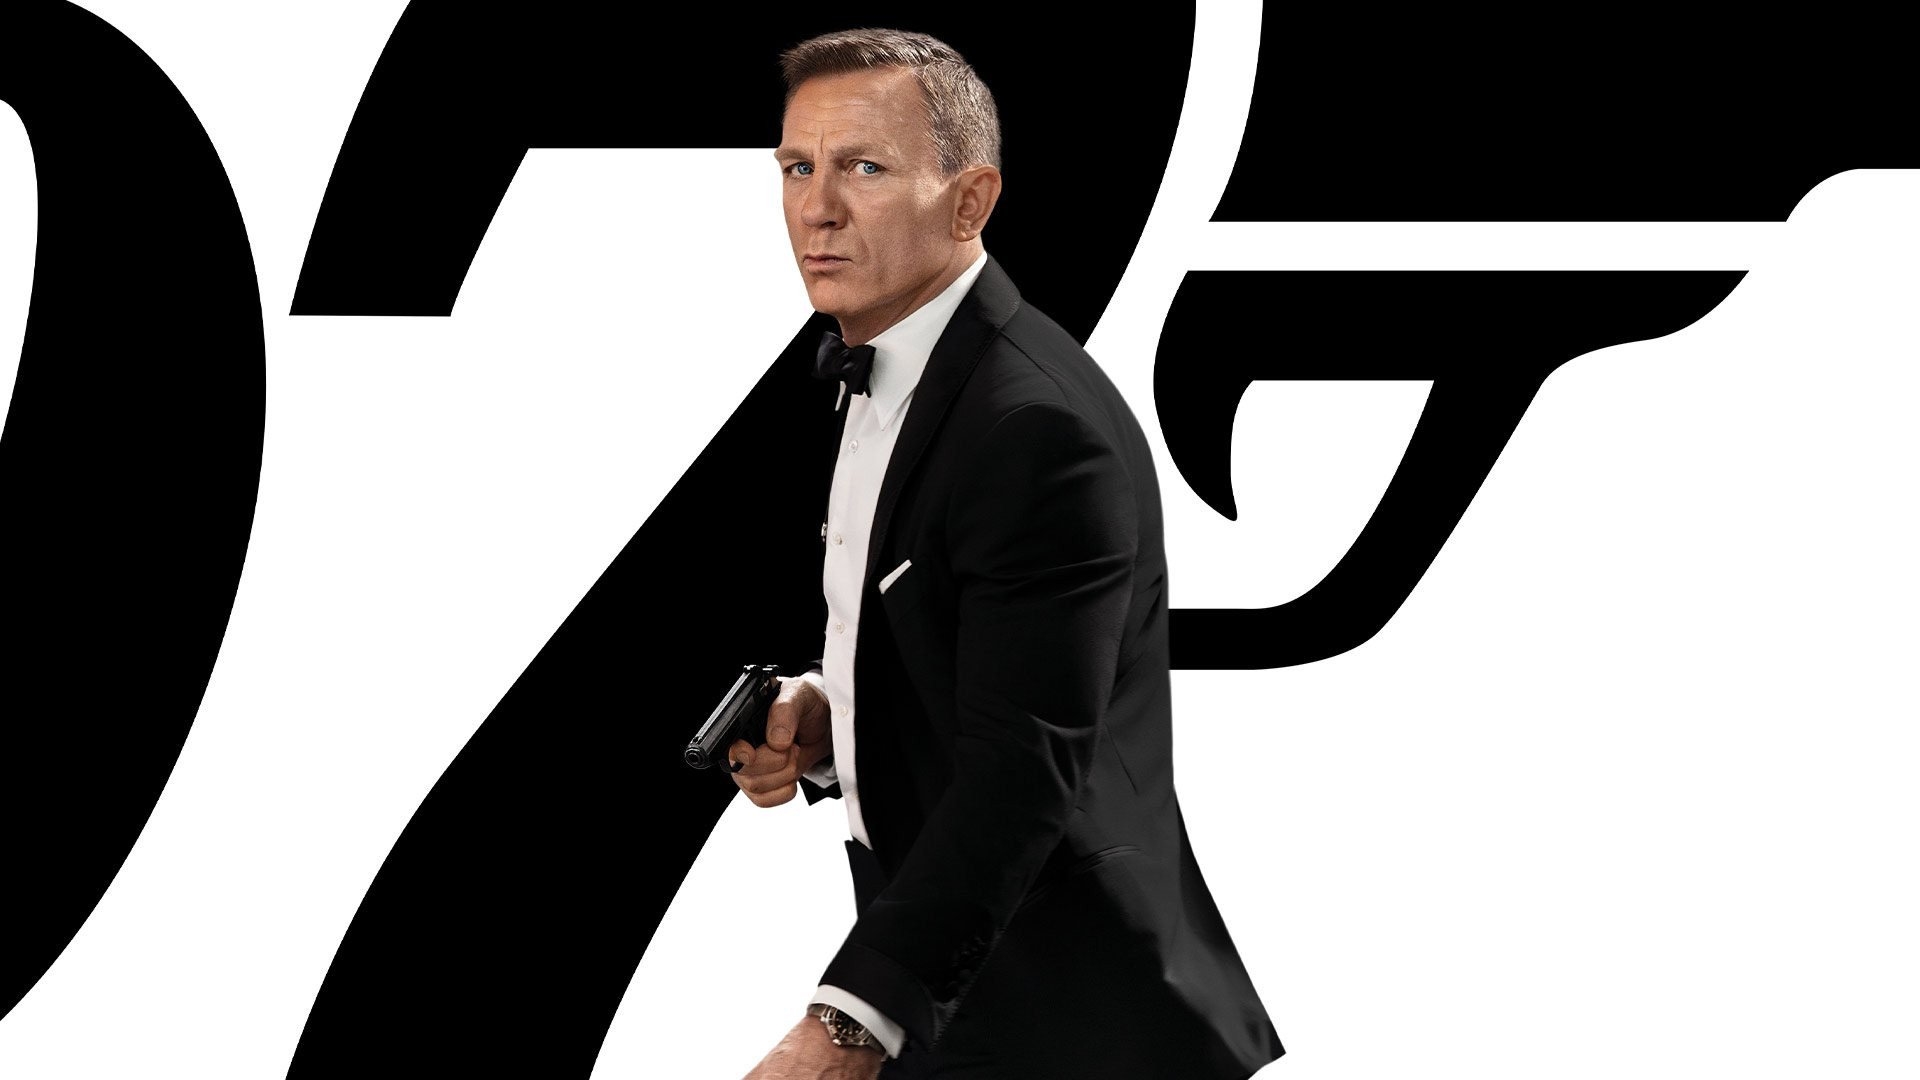 No Time To Die Daniel Craig as James Bond Wallpaper, HD Movies 4K Wallpapers,  Images, Photos and Background - Wallpapers Den